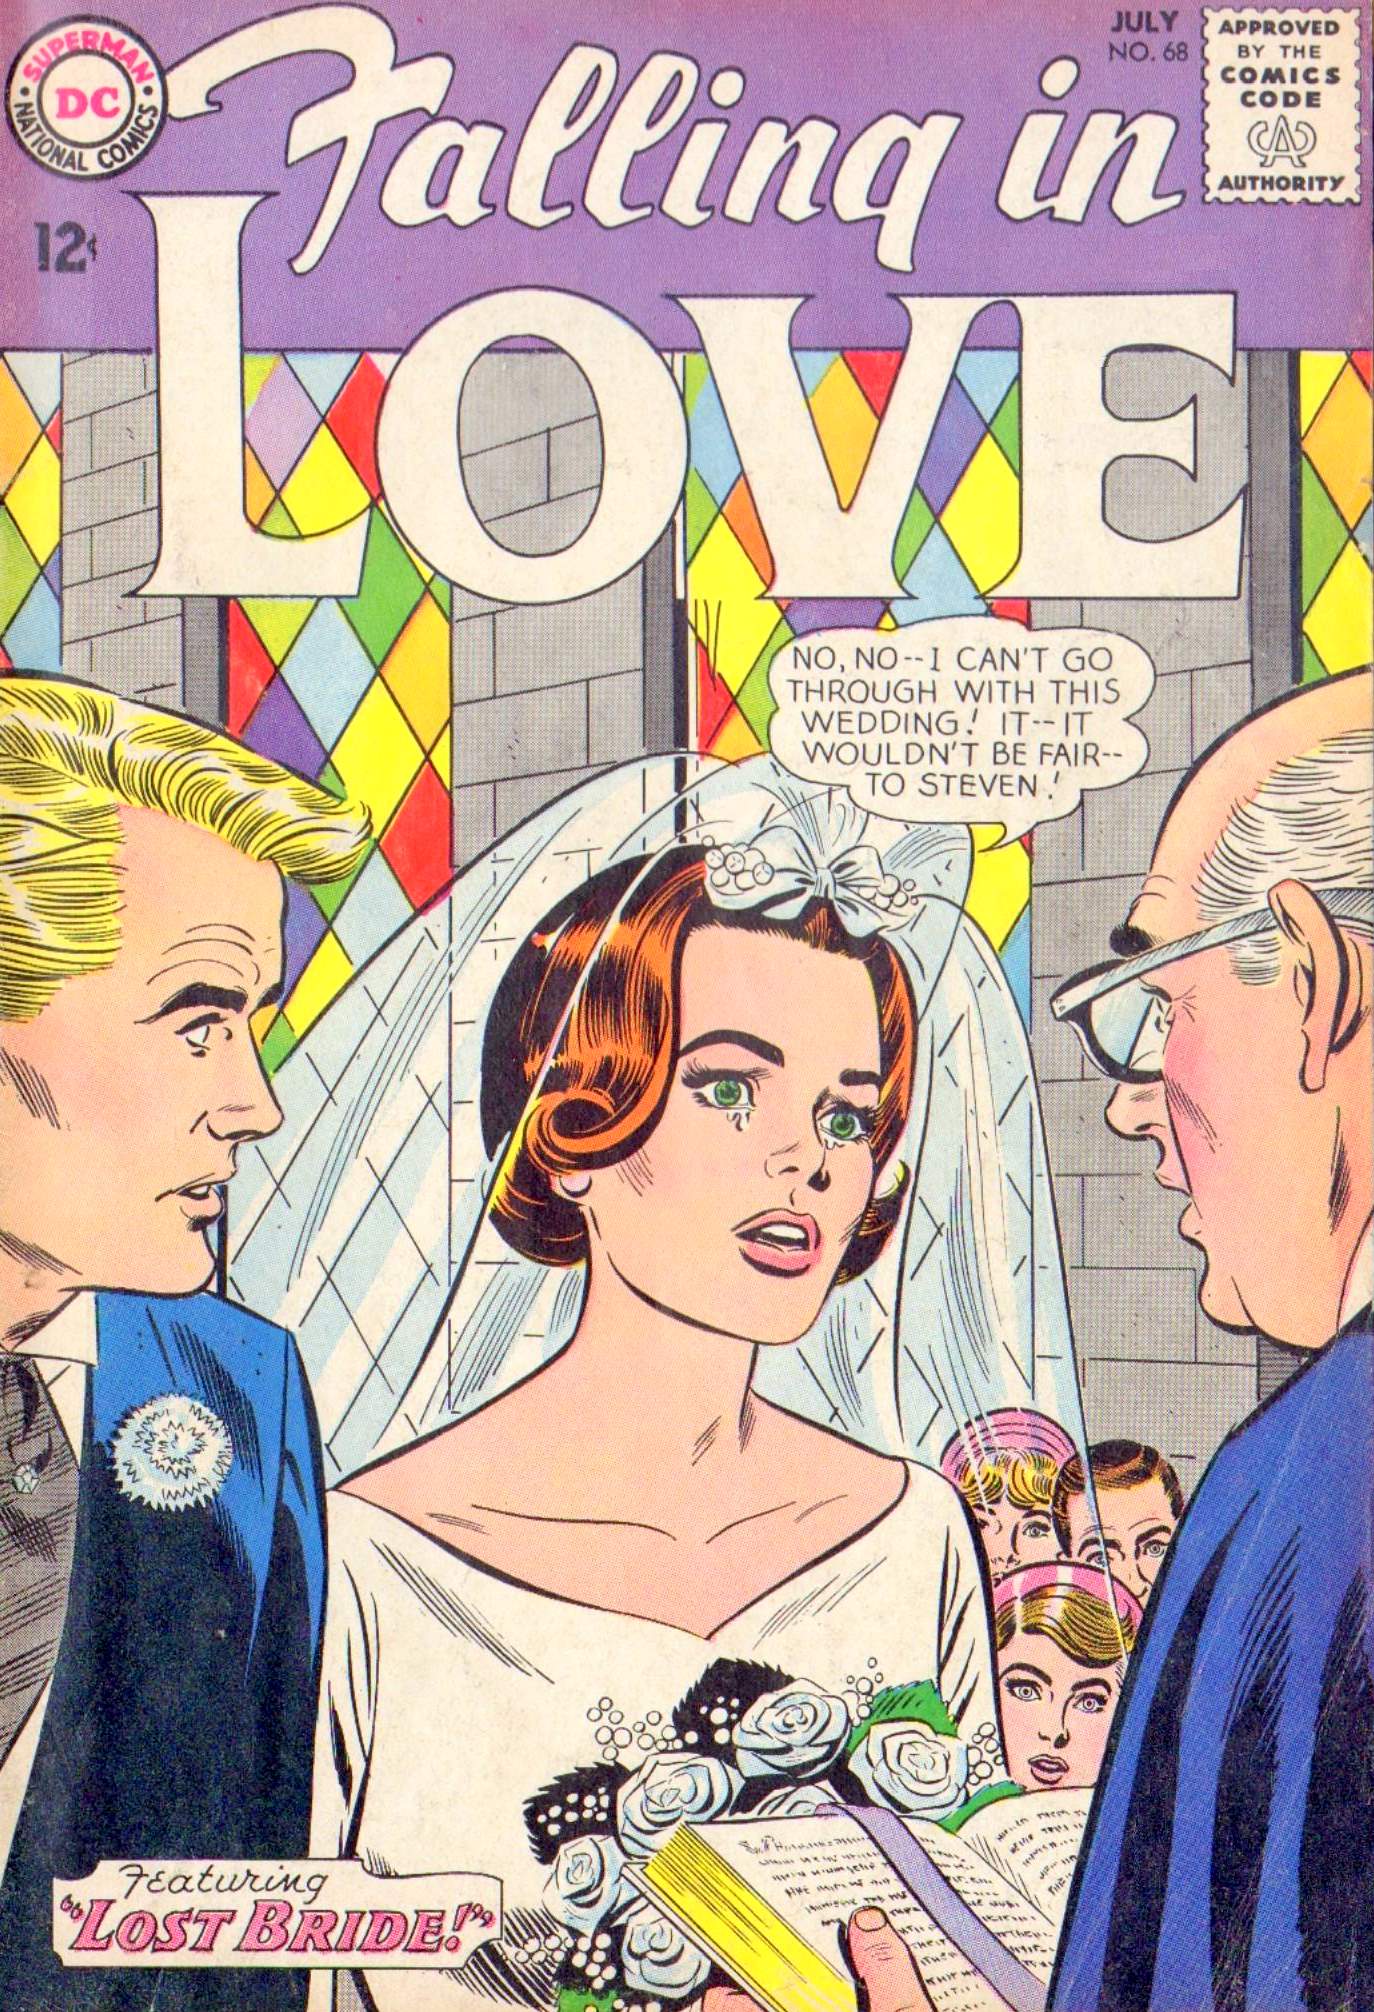 Comics marriage. Issue love